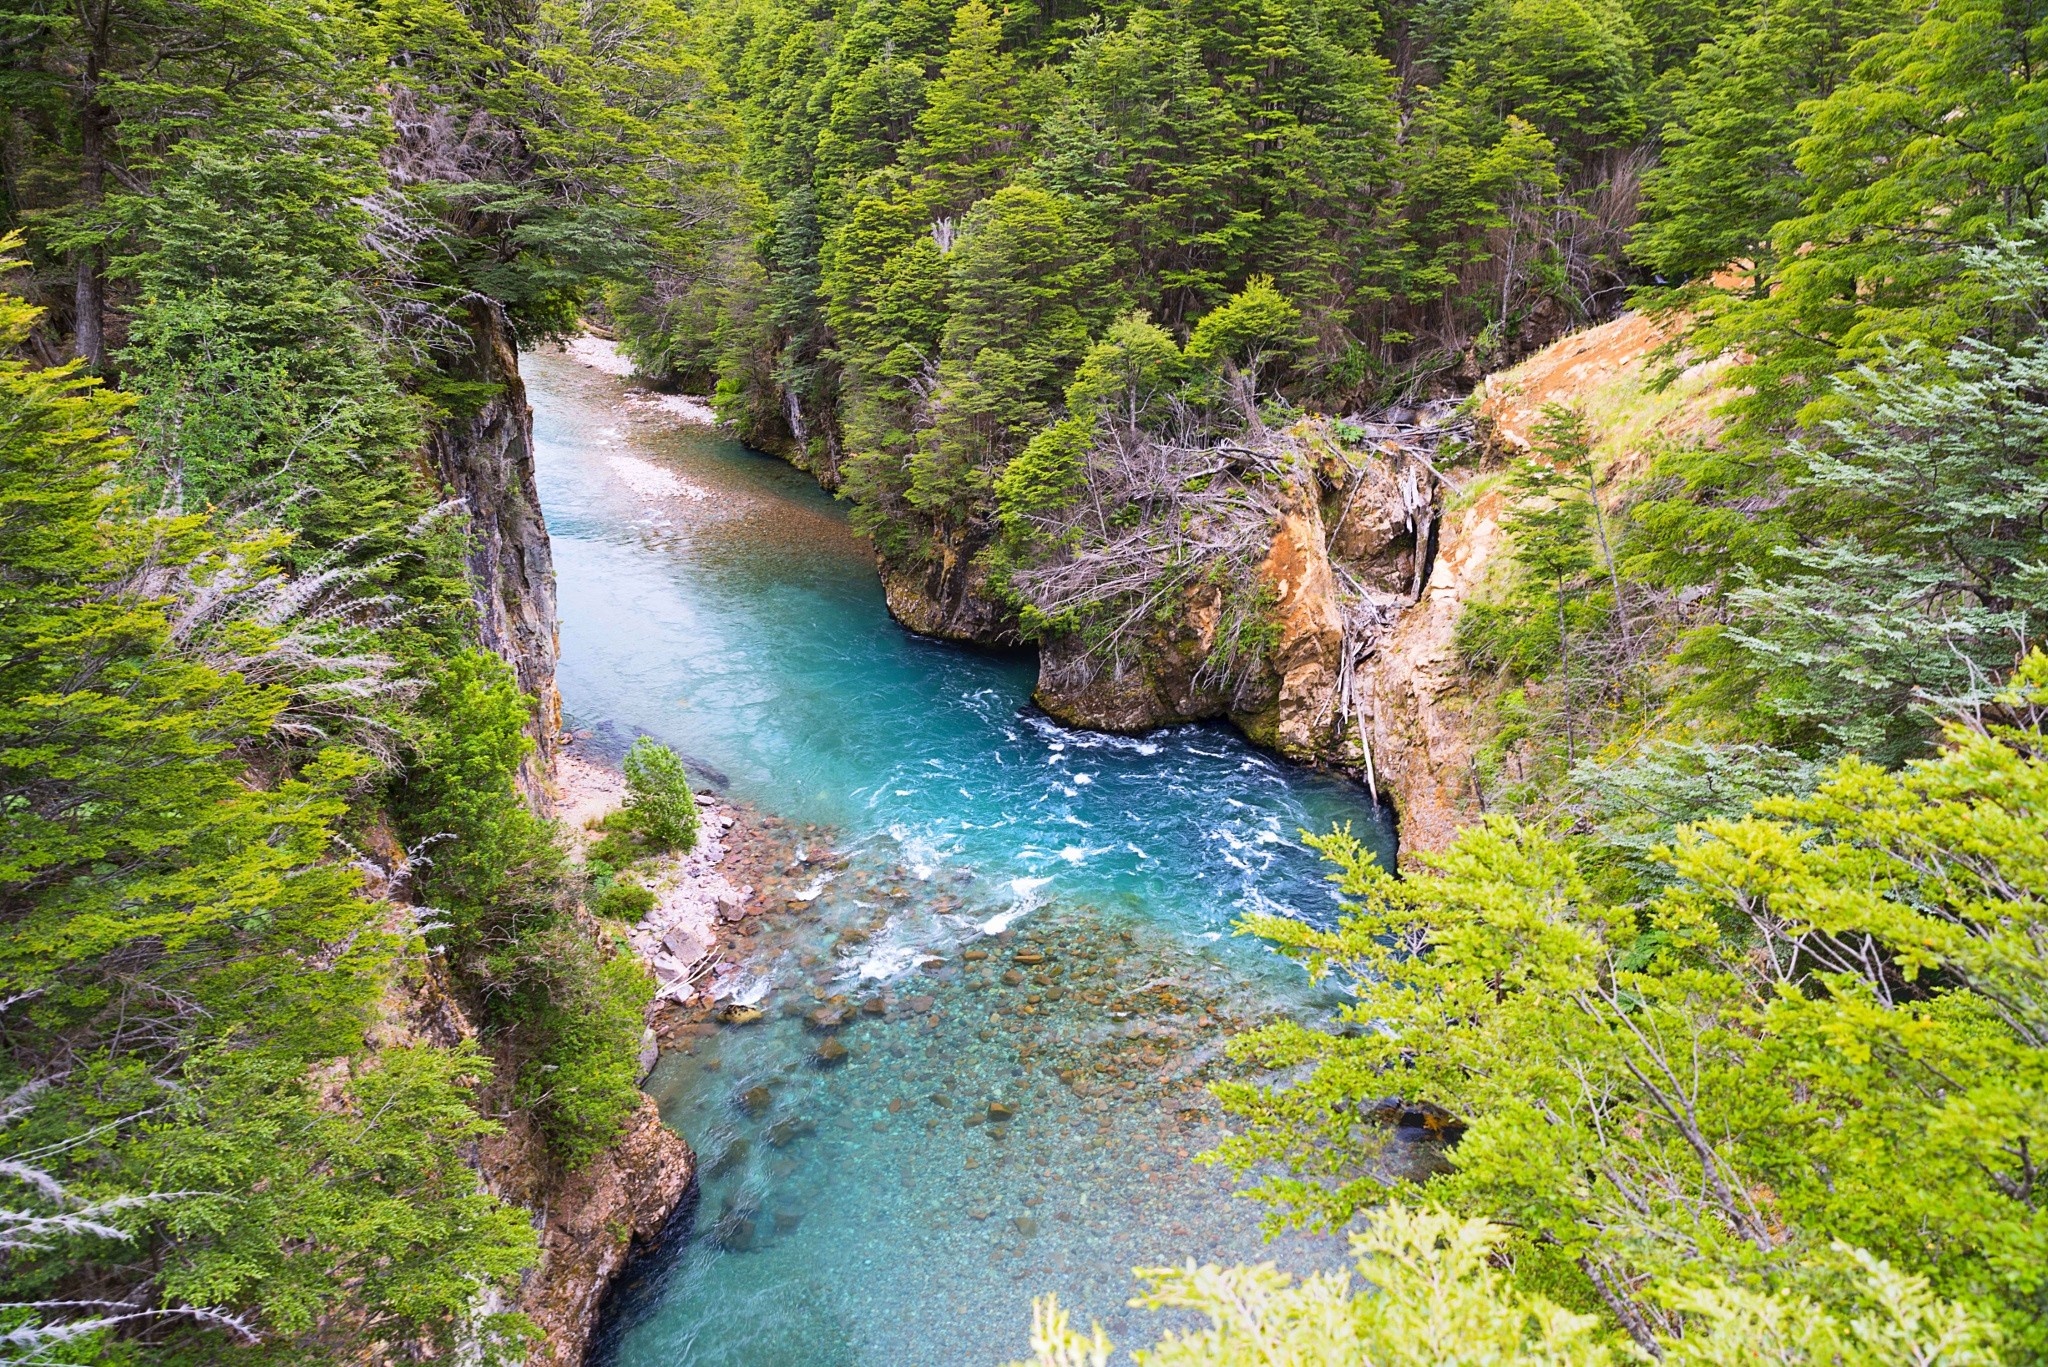 General 2048x1367 nature landscape river forest summer turquoise water trees Patagonia Chile South America